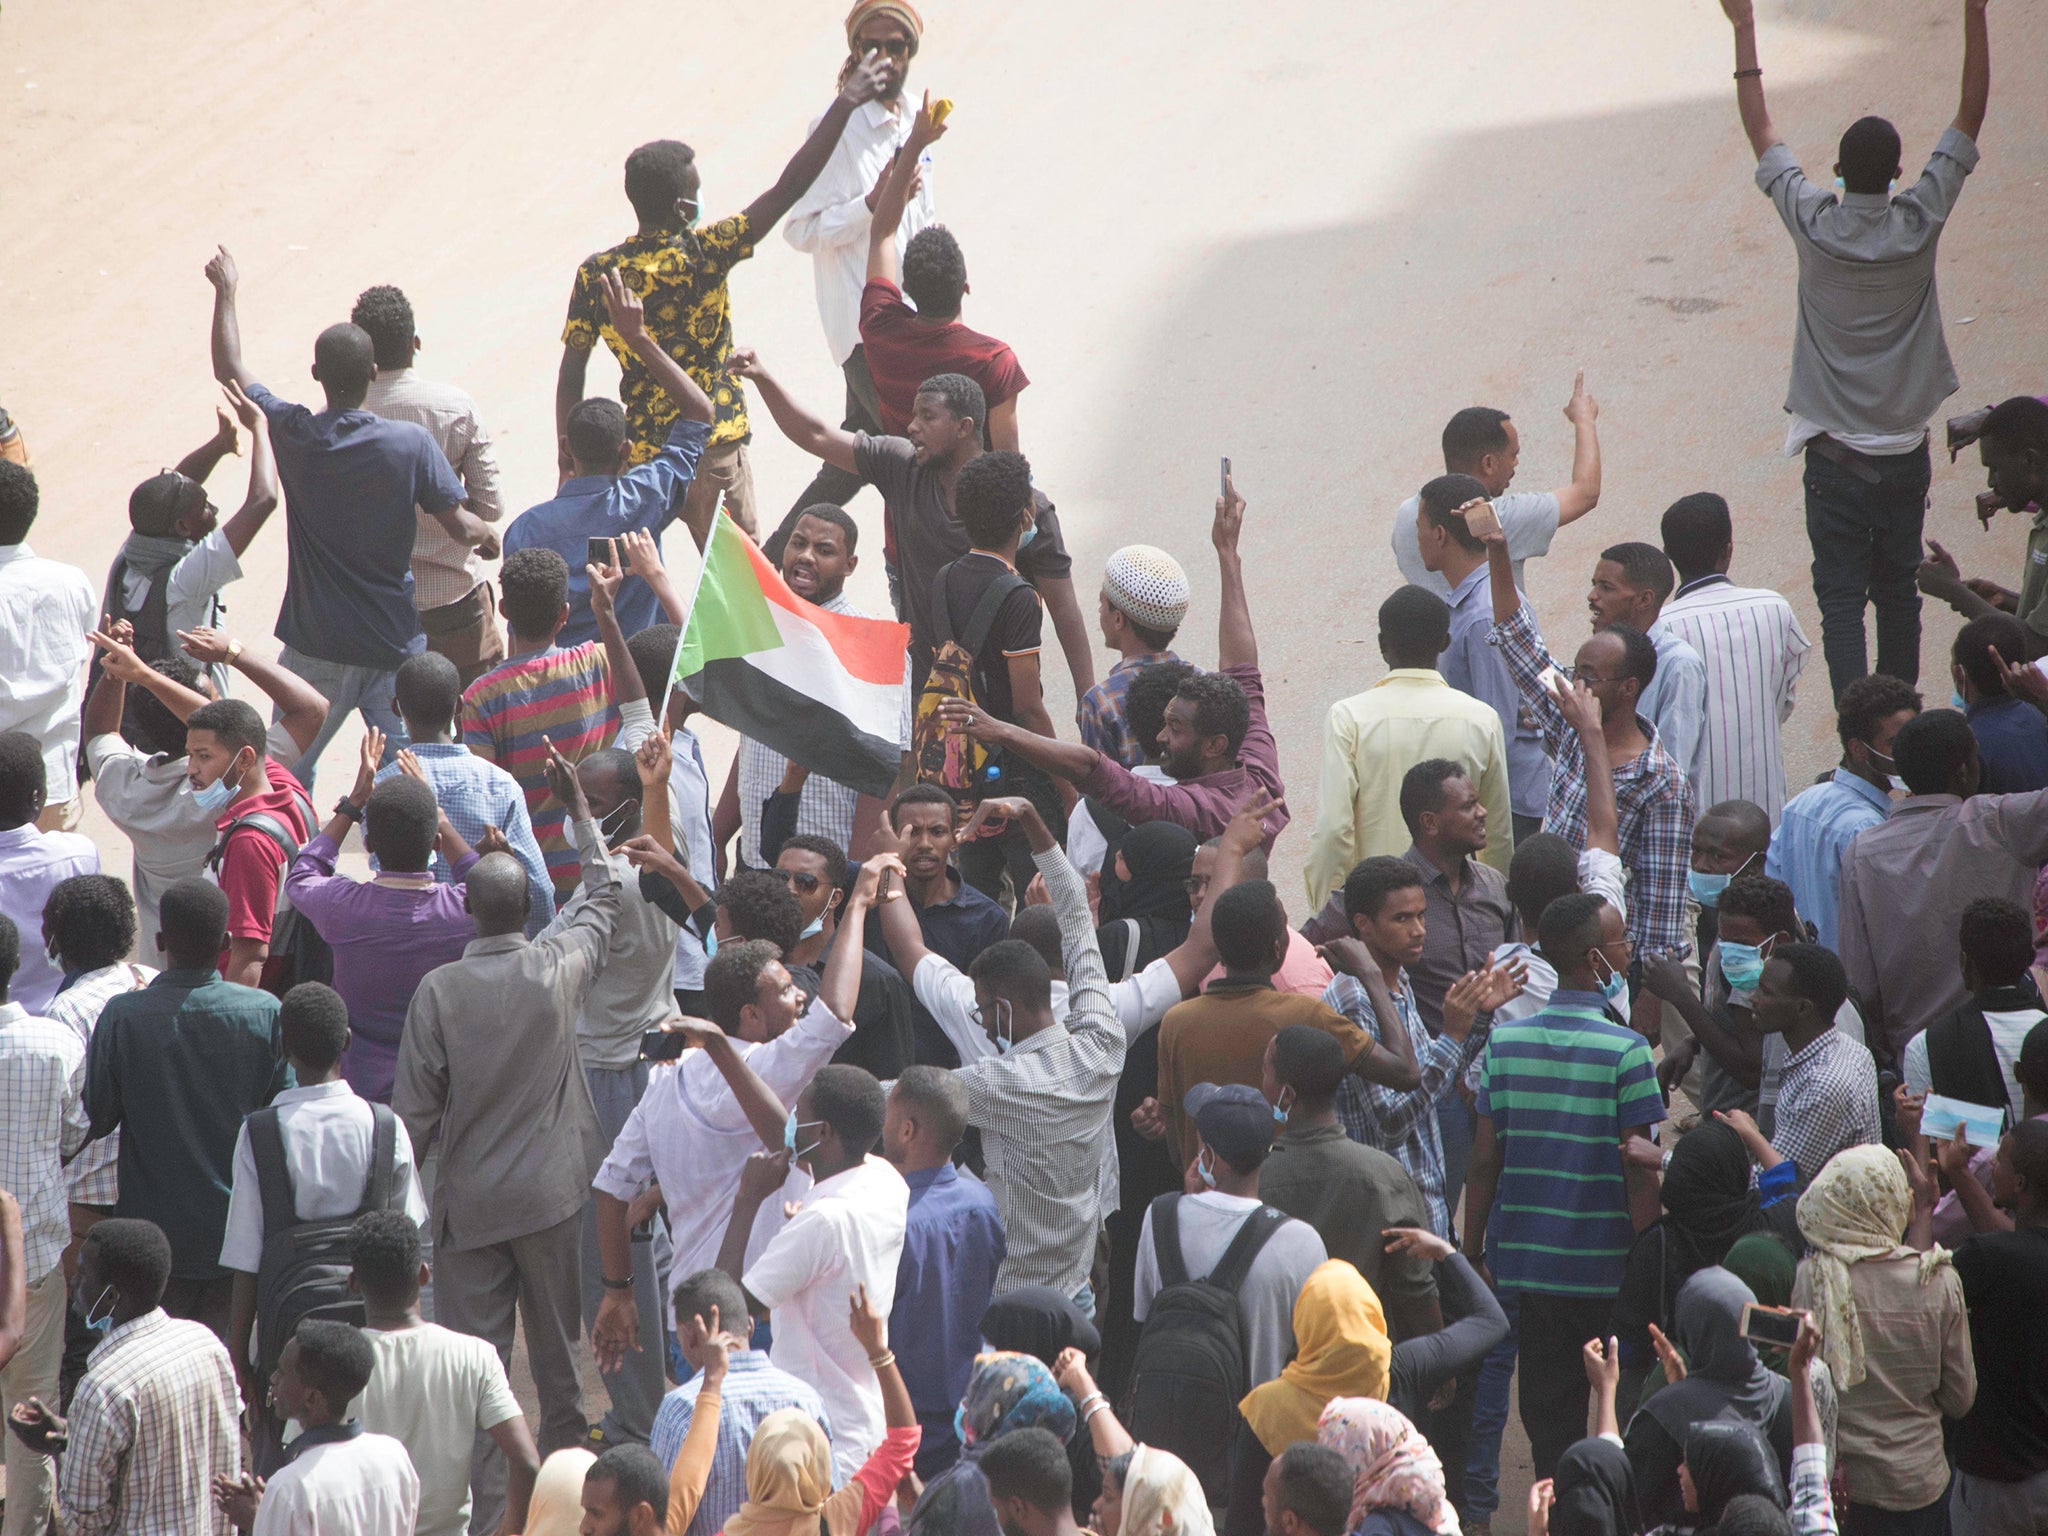 Sudanese demonstrators march during an anti-government protest in Khartoum